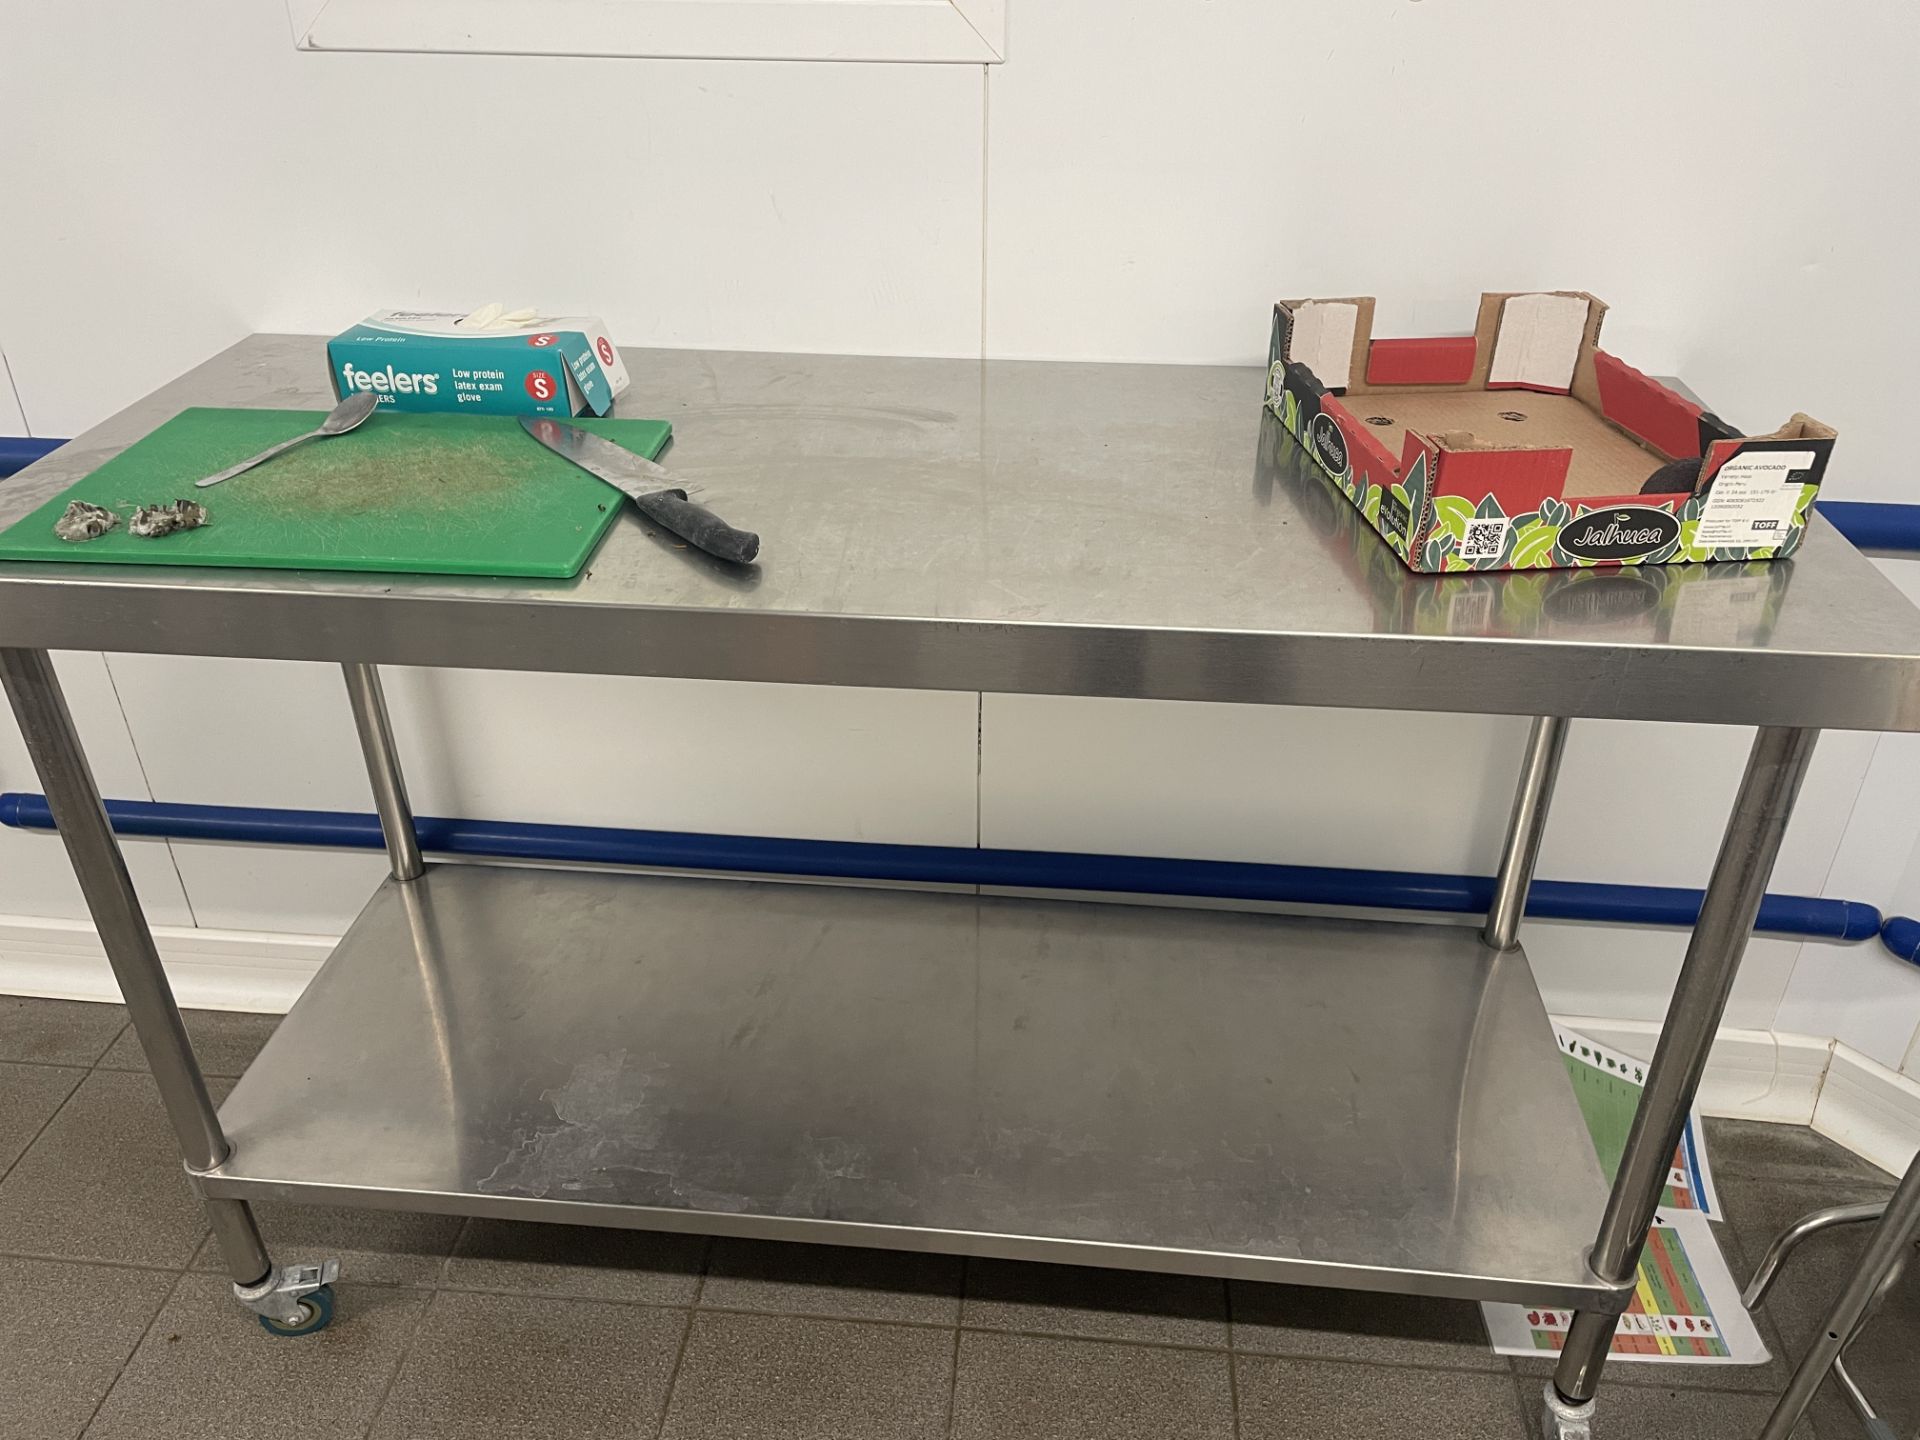 WHEELED STAINLESS STEEL WORK UNIT/BENCH (SIZE:150(L)X60(D)X90(H)CM. VEG ROOM